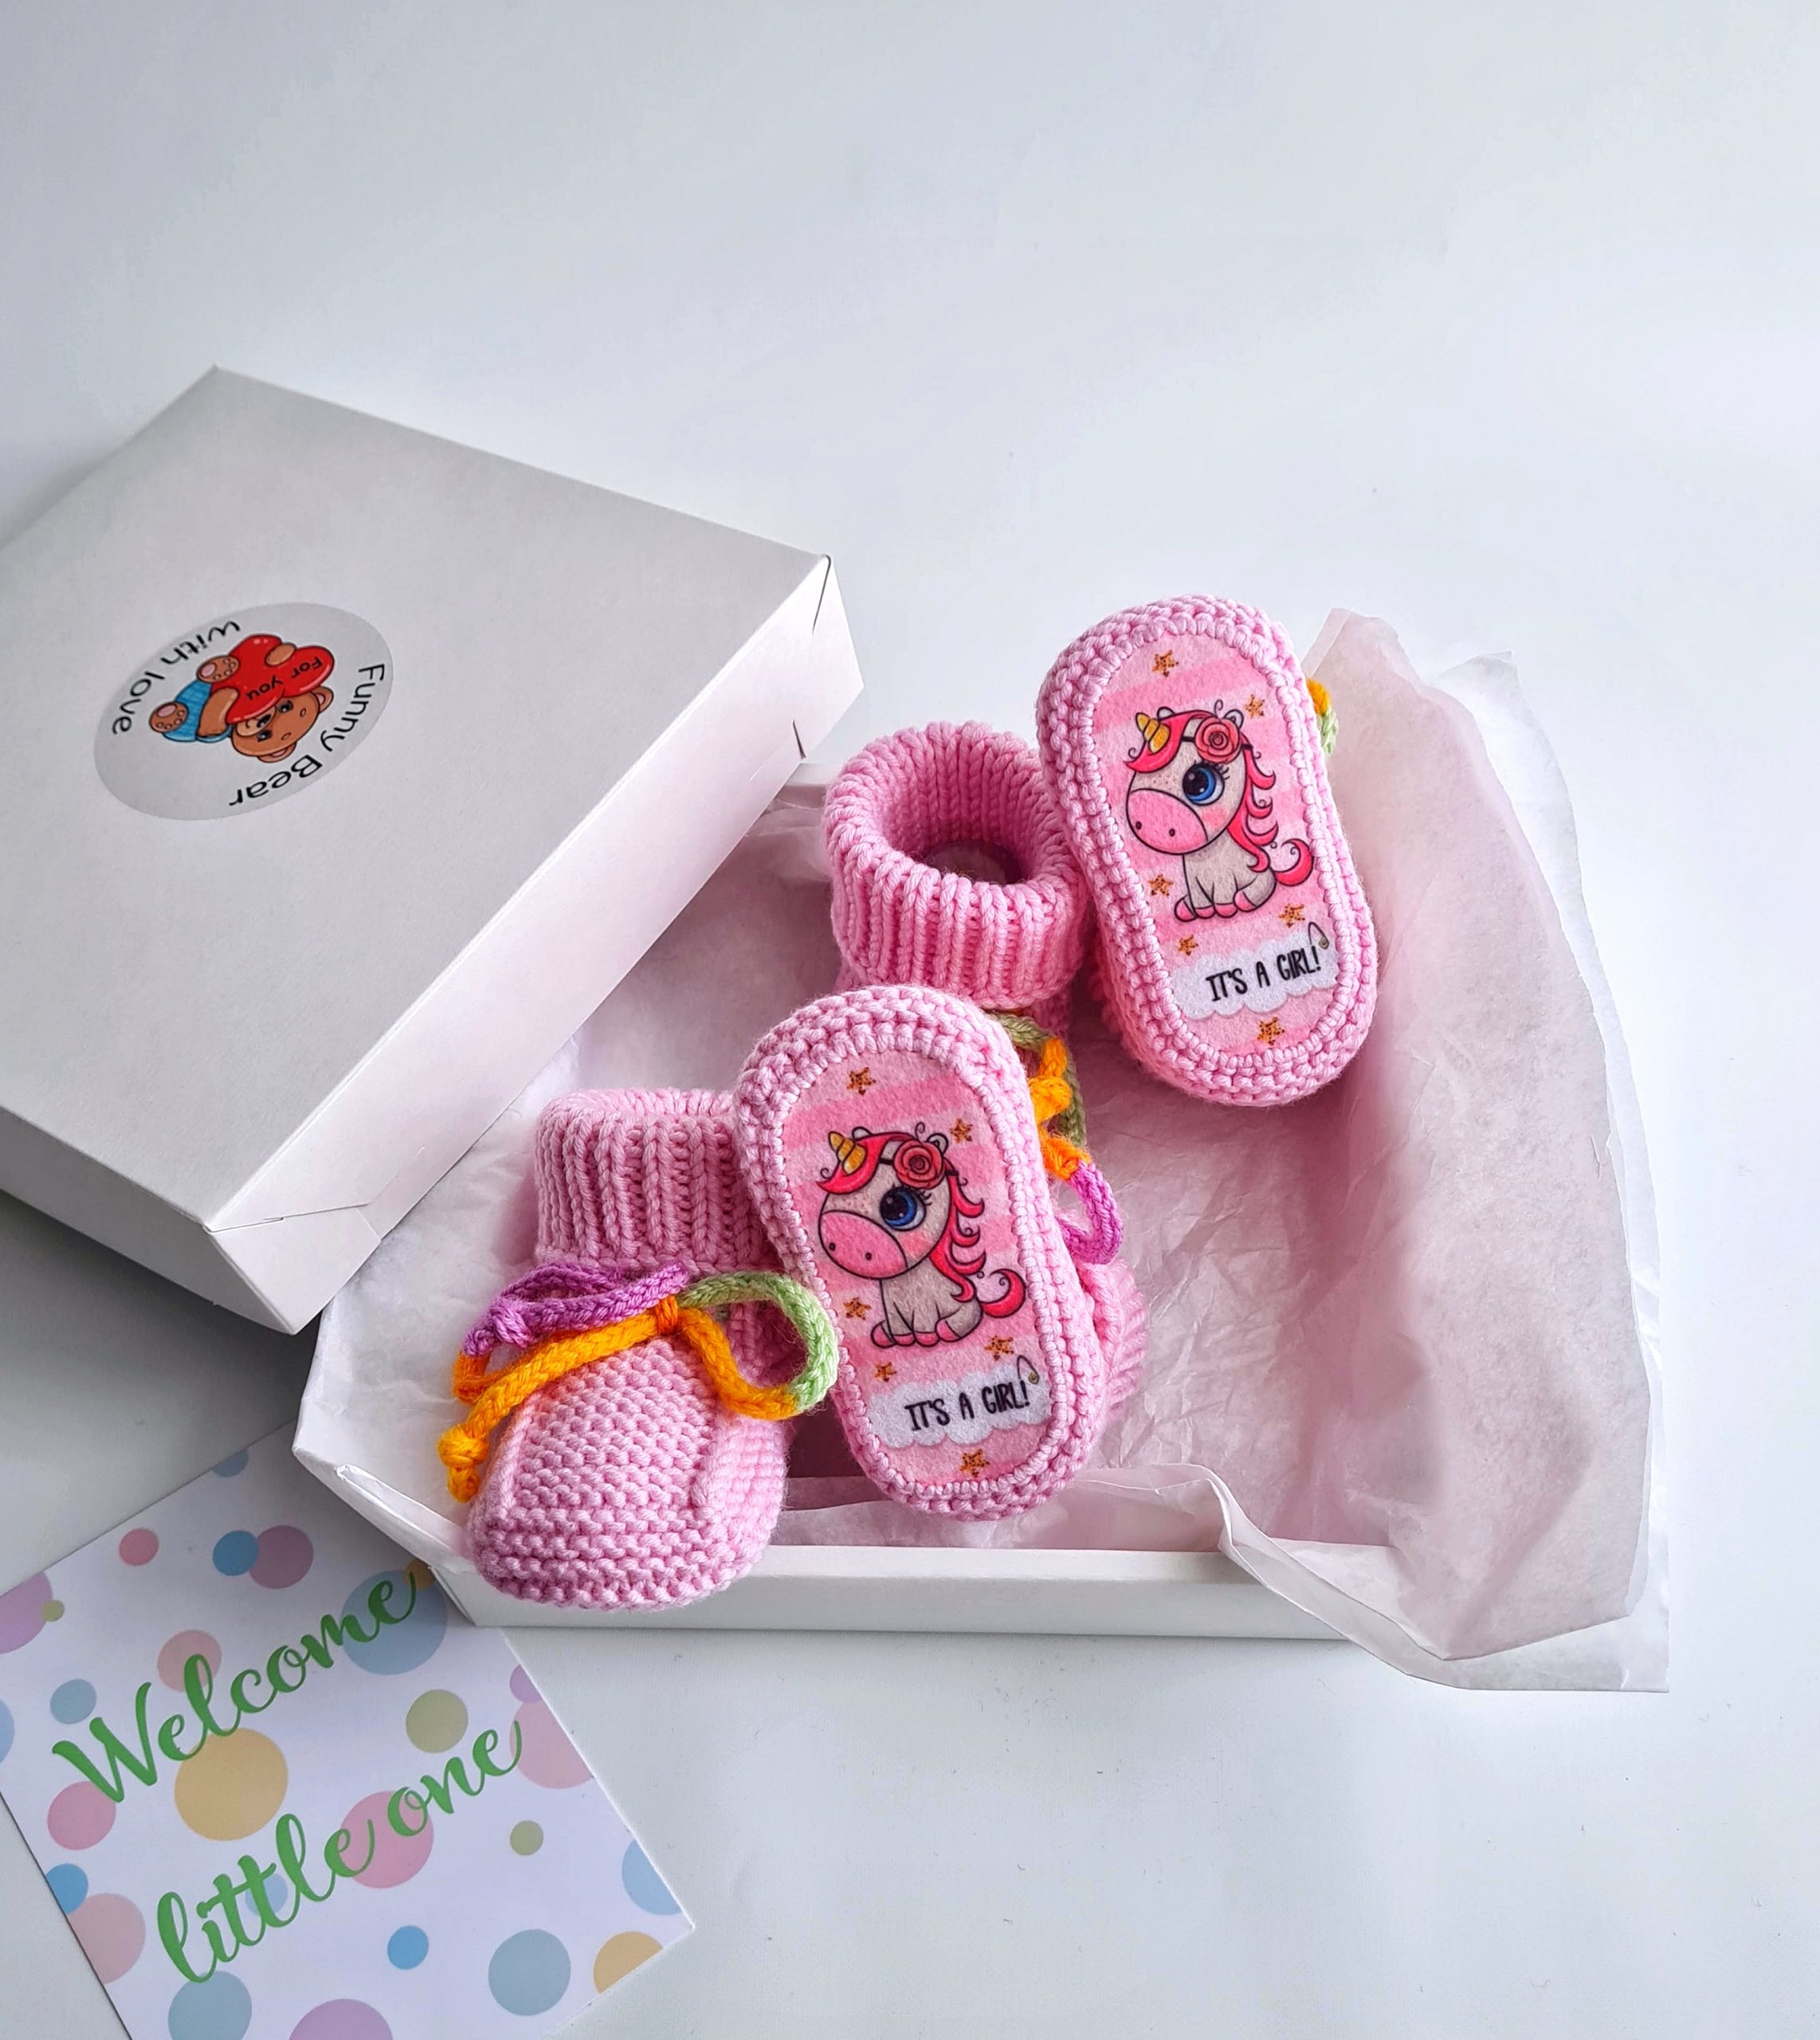 Best baby shower gift ideas parents expecting twins girl